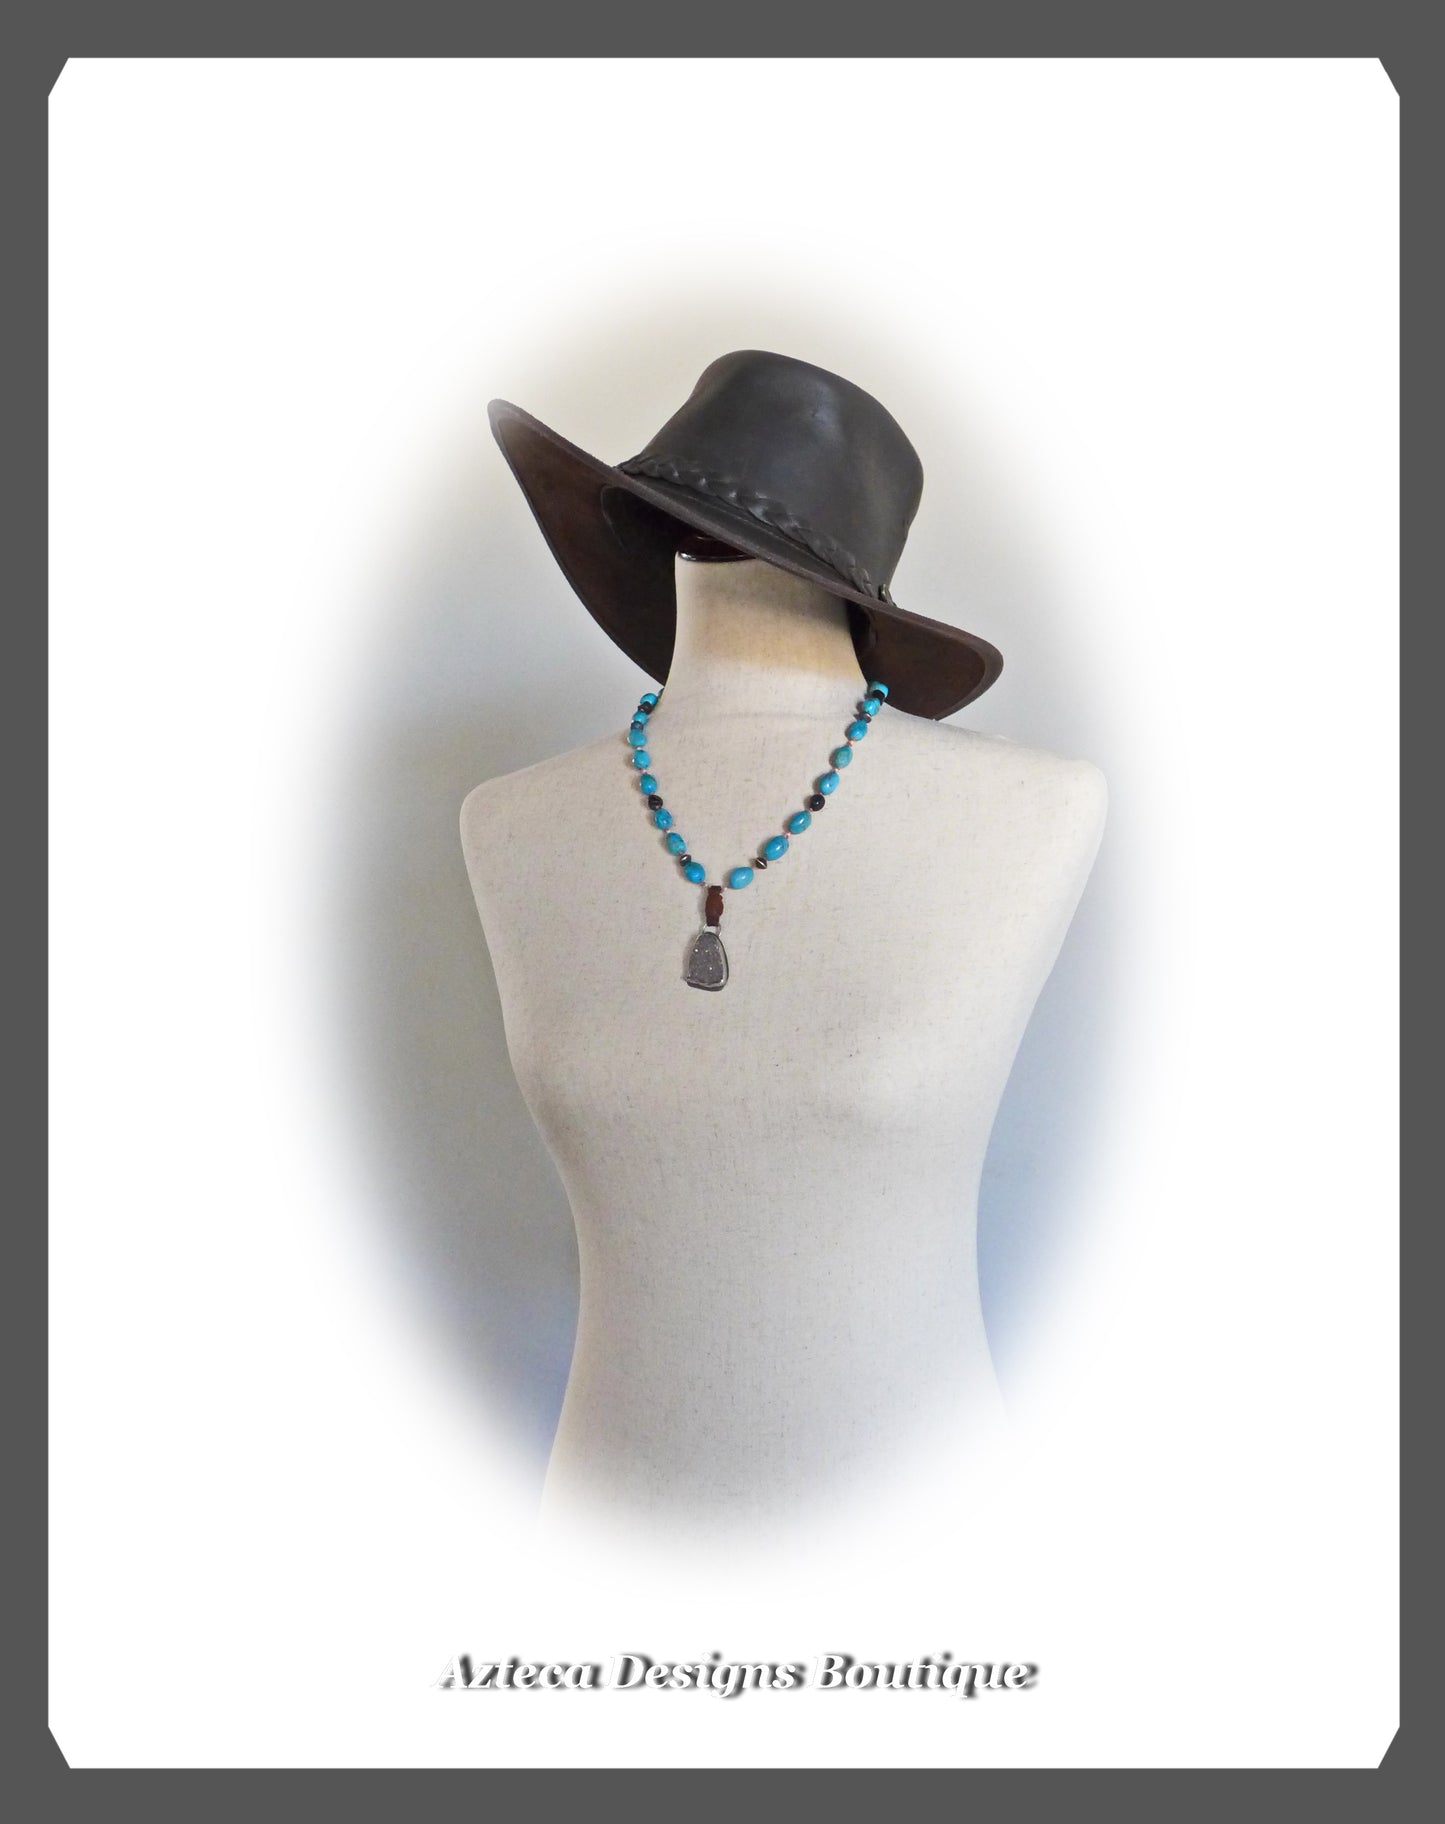 Druzy+Blue Tigers' Eye+Campitos Turquoise+Sterling Silver Necklace